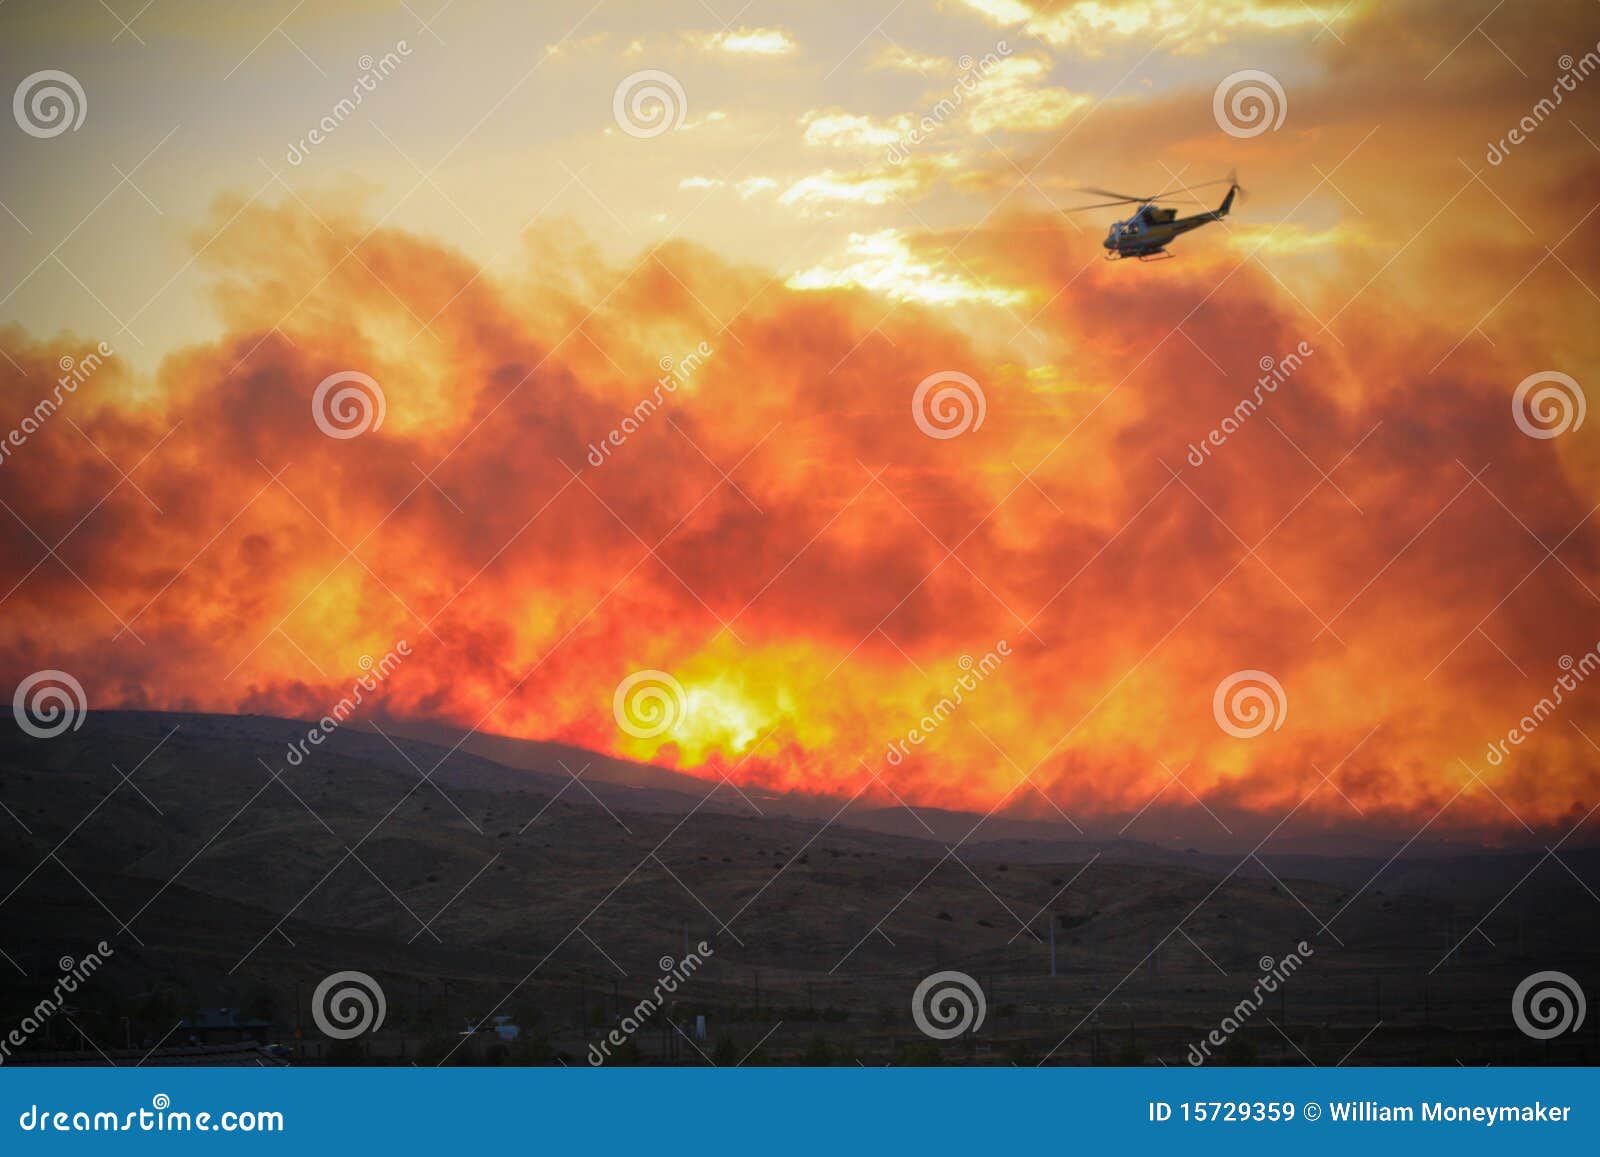 helicopter flying over fire